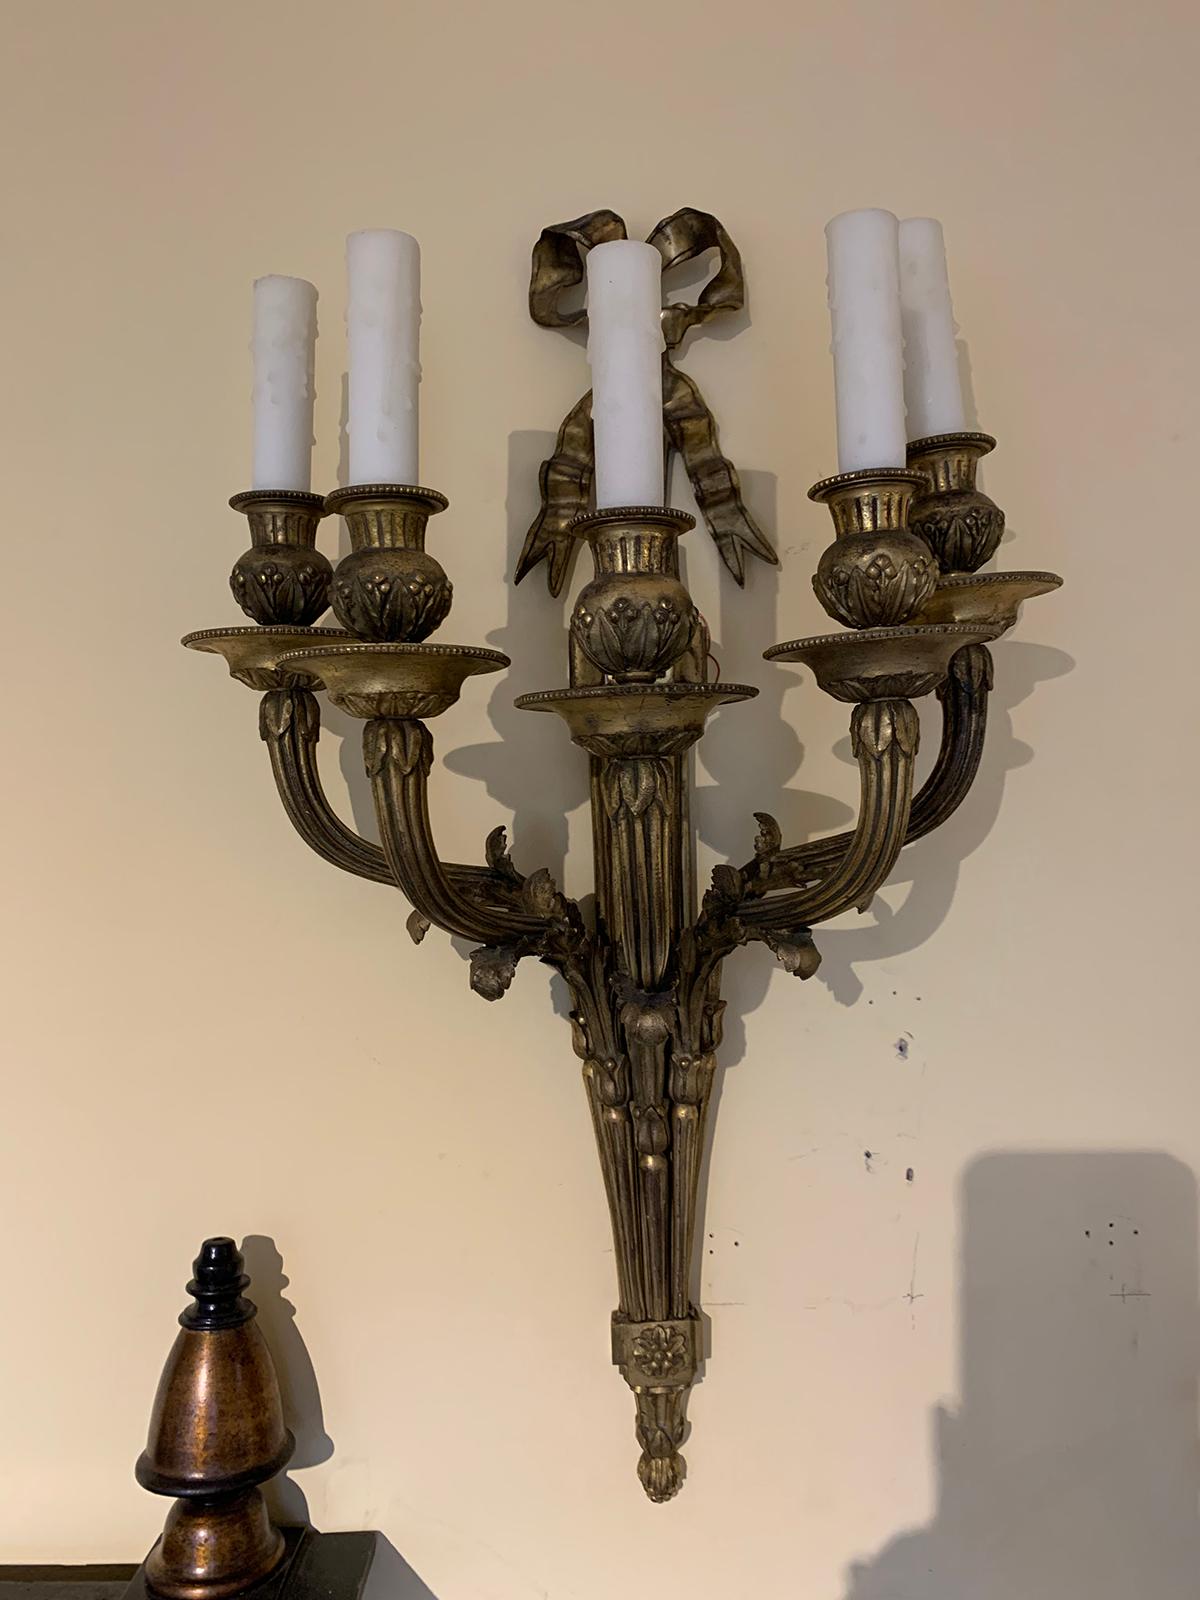 Pair of Louis XVI style bronze five-arm sconces with bows, circa 1900
New wiring.